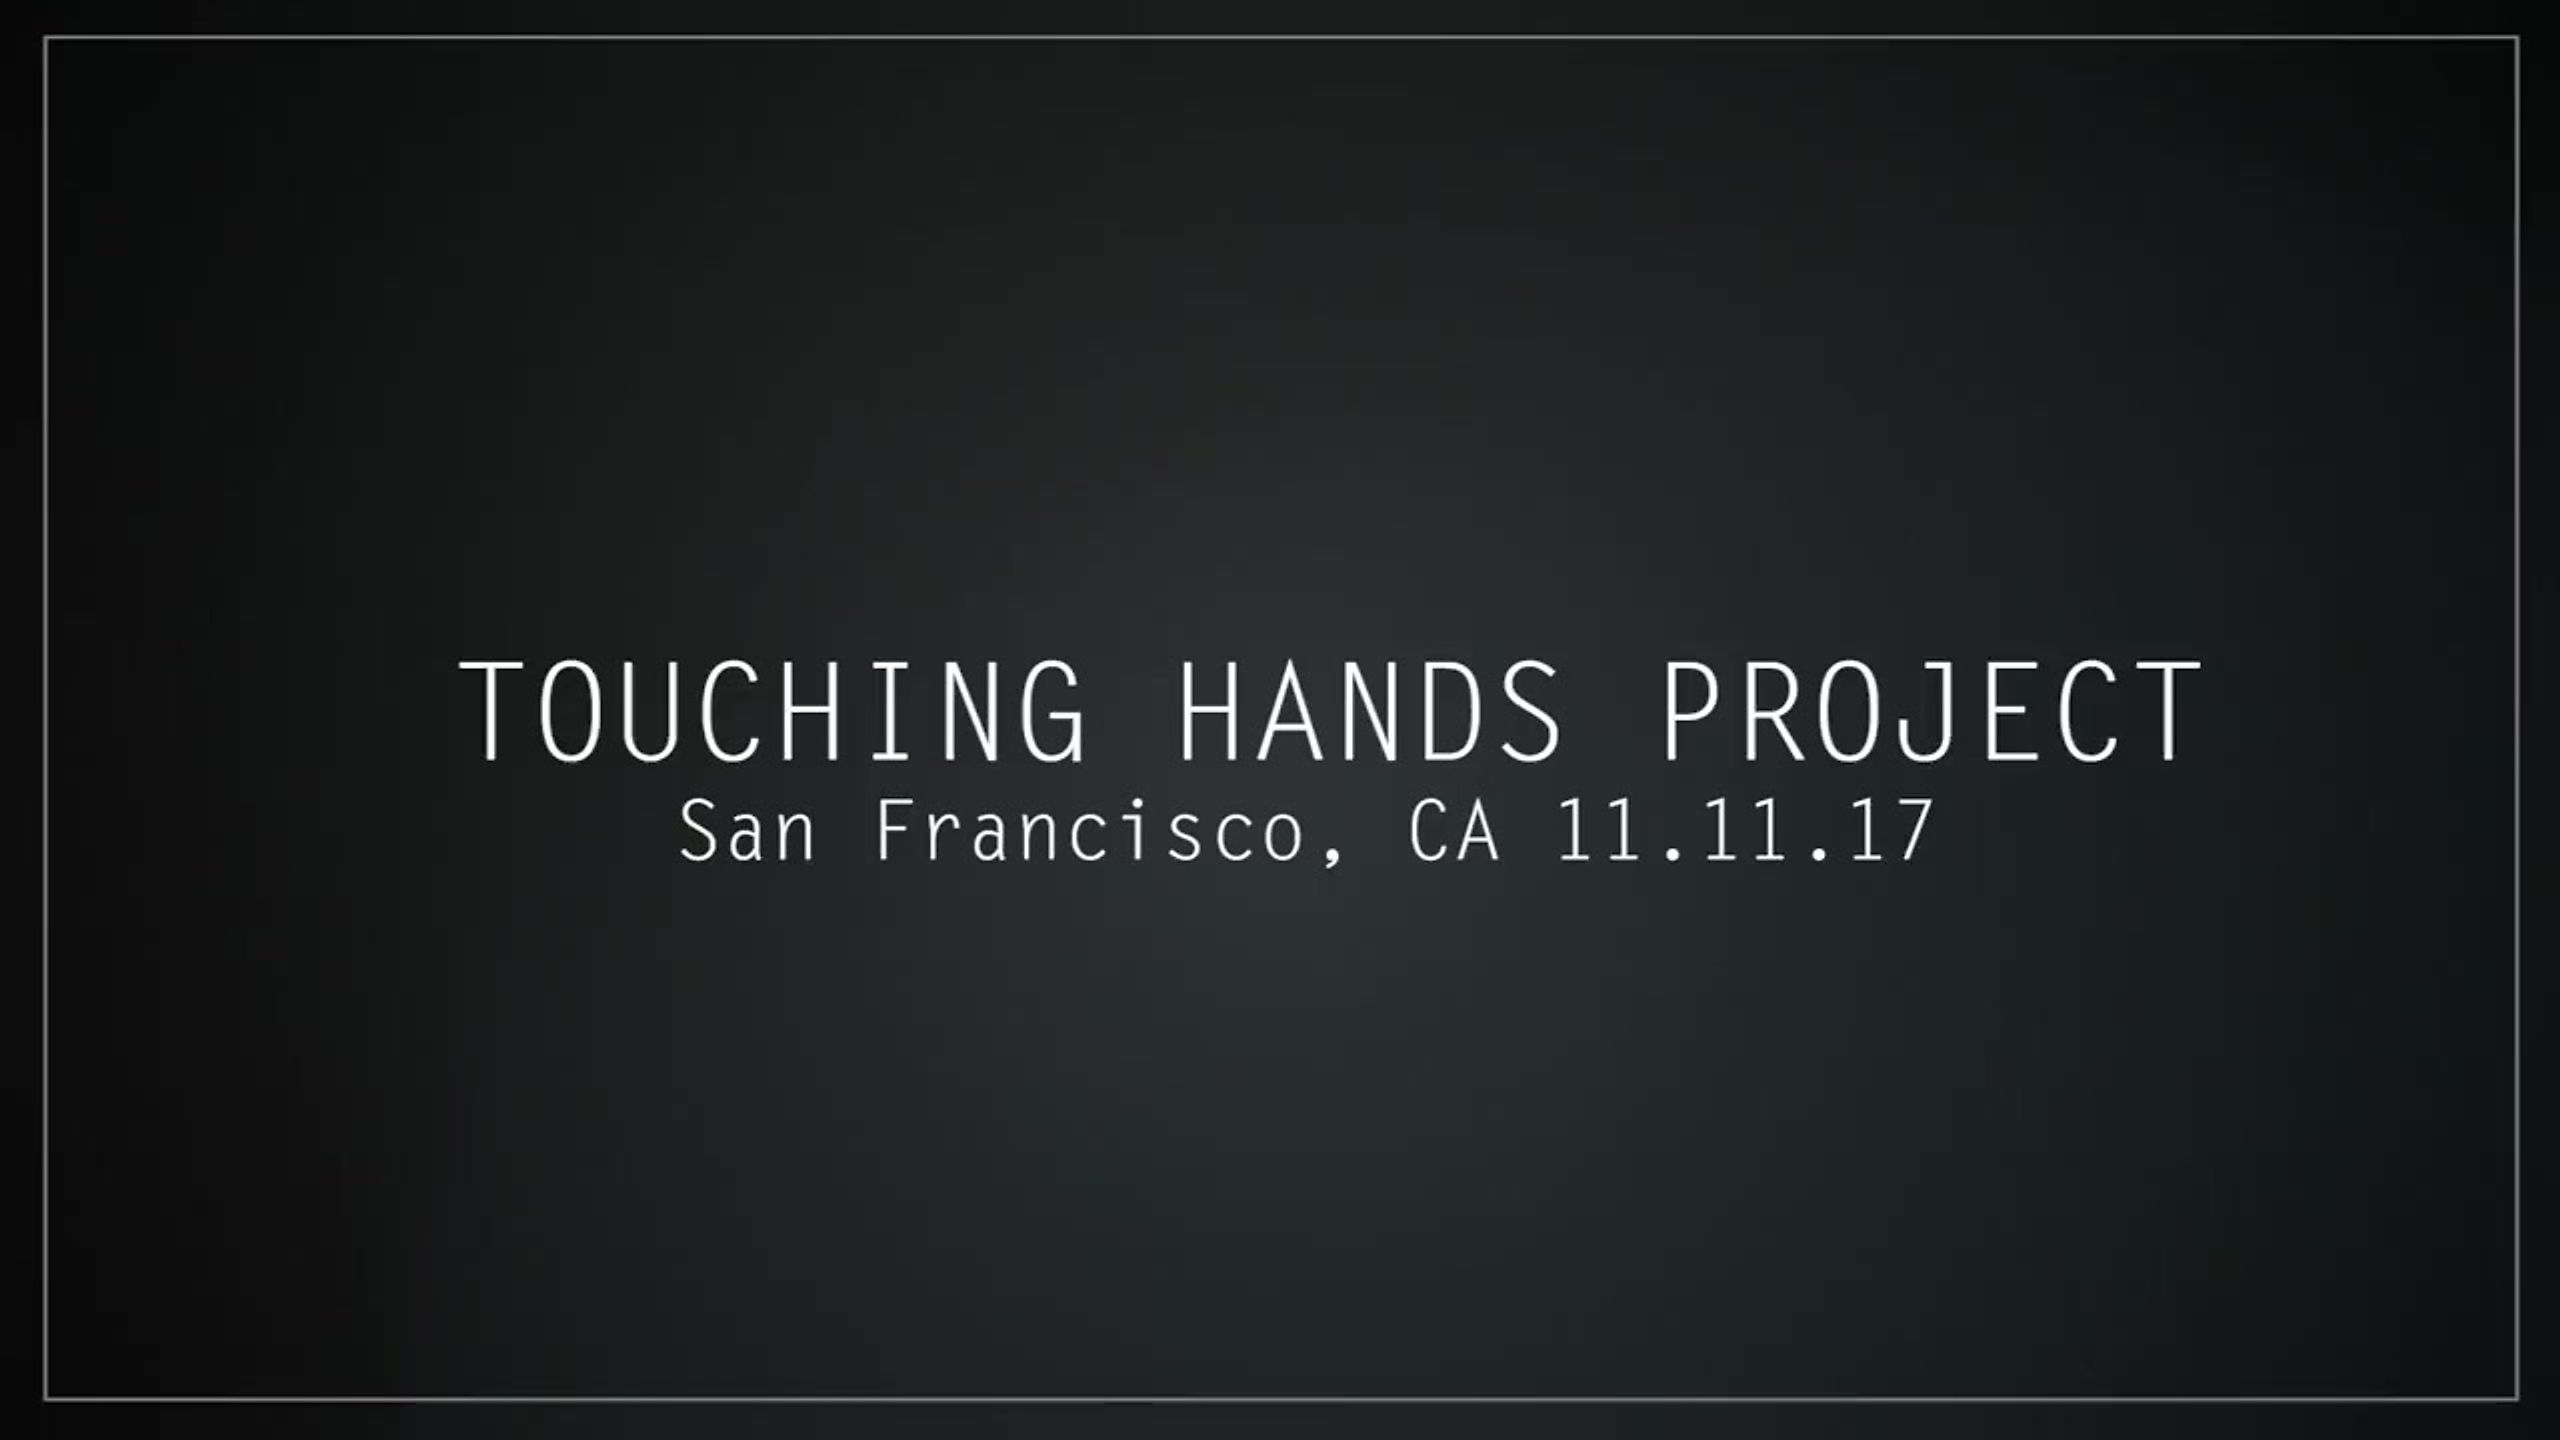 Touching Hands Project - San Francisco, CA 11-11-17